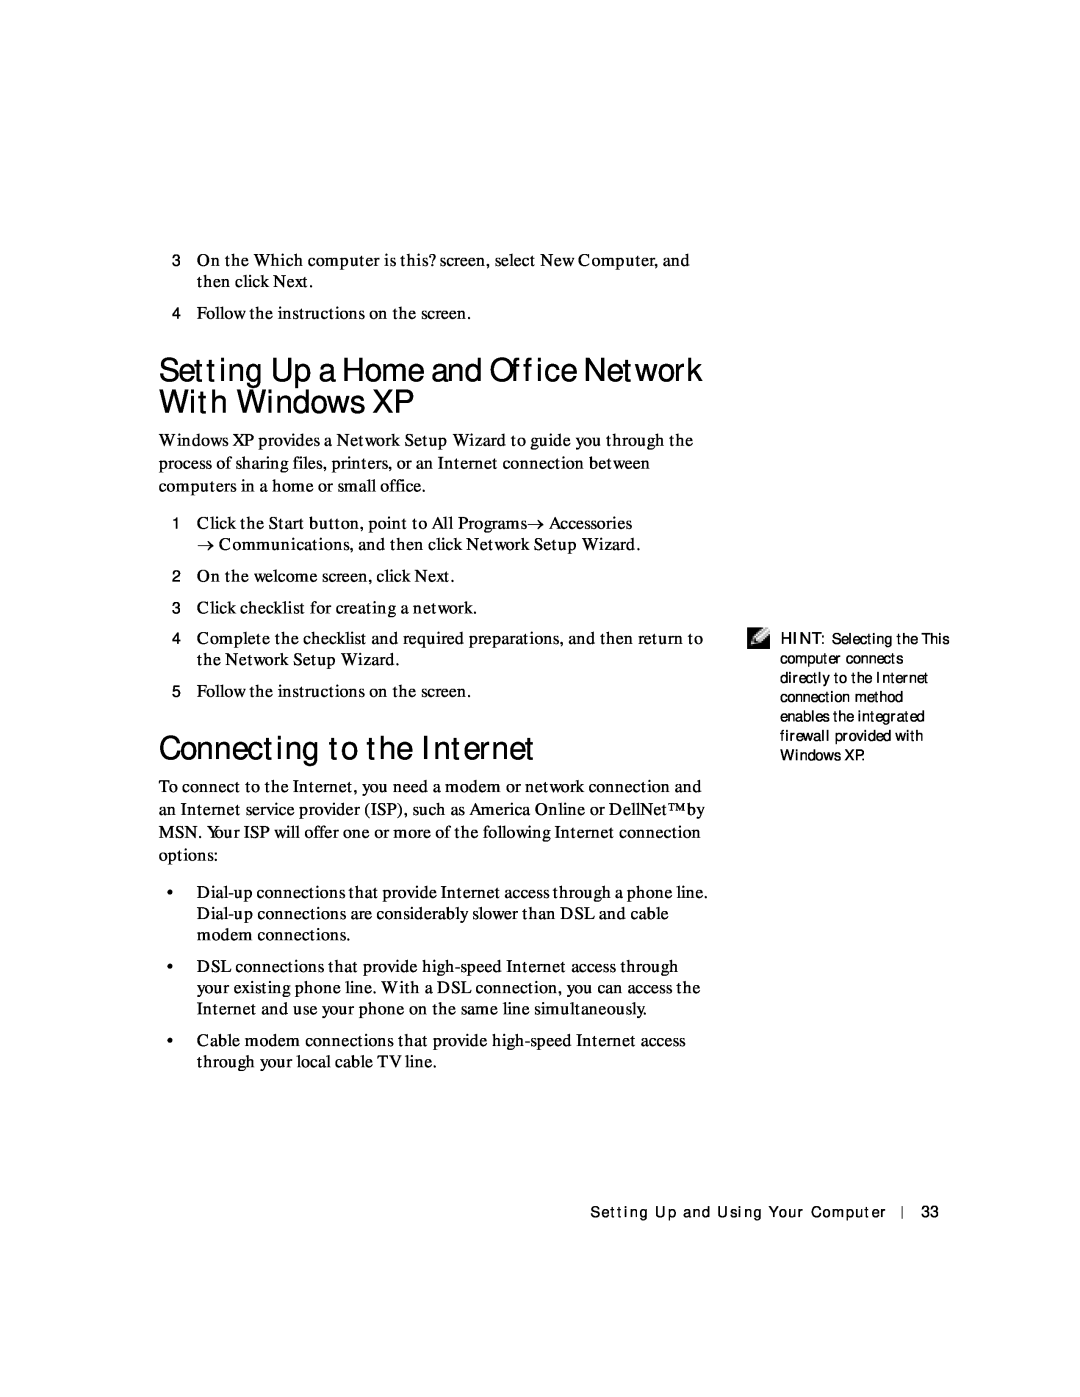 Dell 4150 owner manual Setting Up a Home and Office Network With Windows XP, Connecting to the Internet 